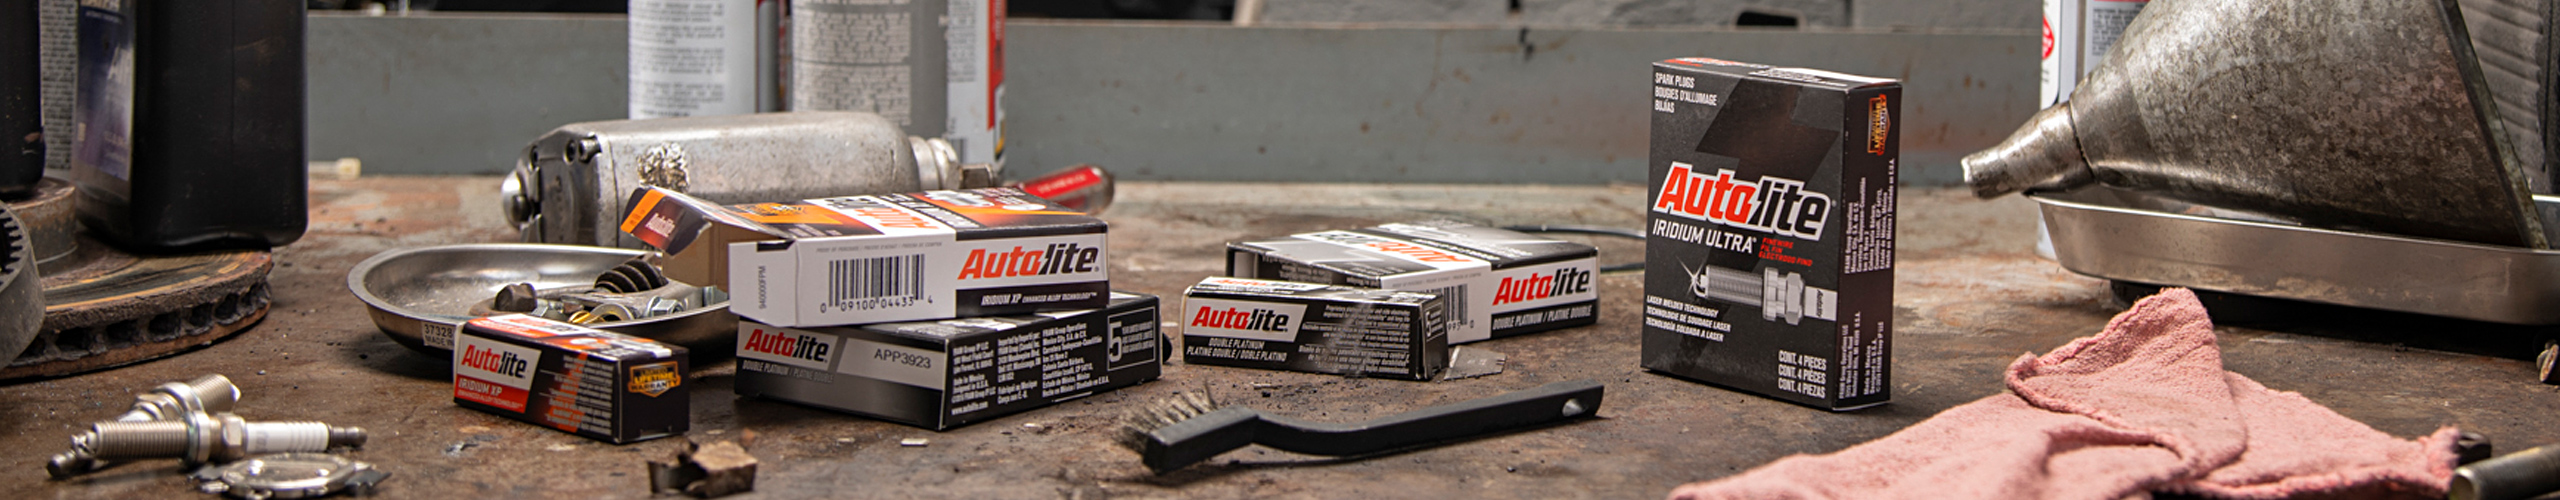 Workbench with Autolite packaging displayed